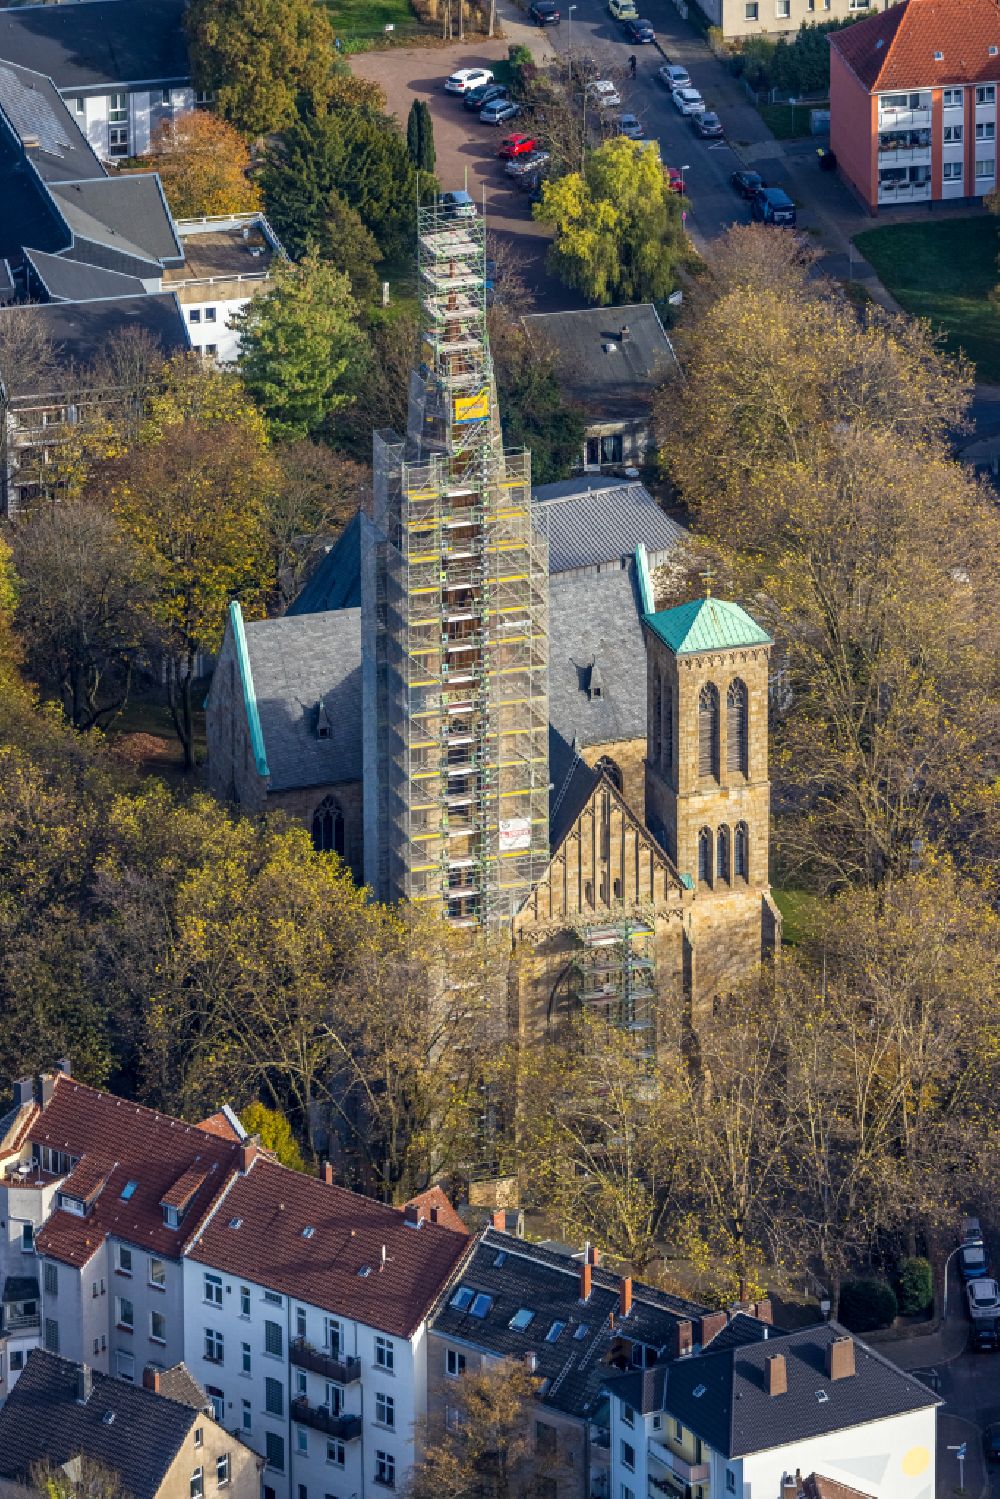 Herne from the bird's eye view: Construction site for renovation and reconstruction work on the church building Herz Jesu Kirche on street Duengelstrasse in Herne at Ruhrgebiet in the state North Rhine-Westphalia, Germany